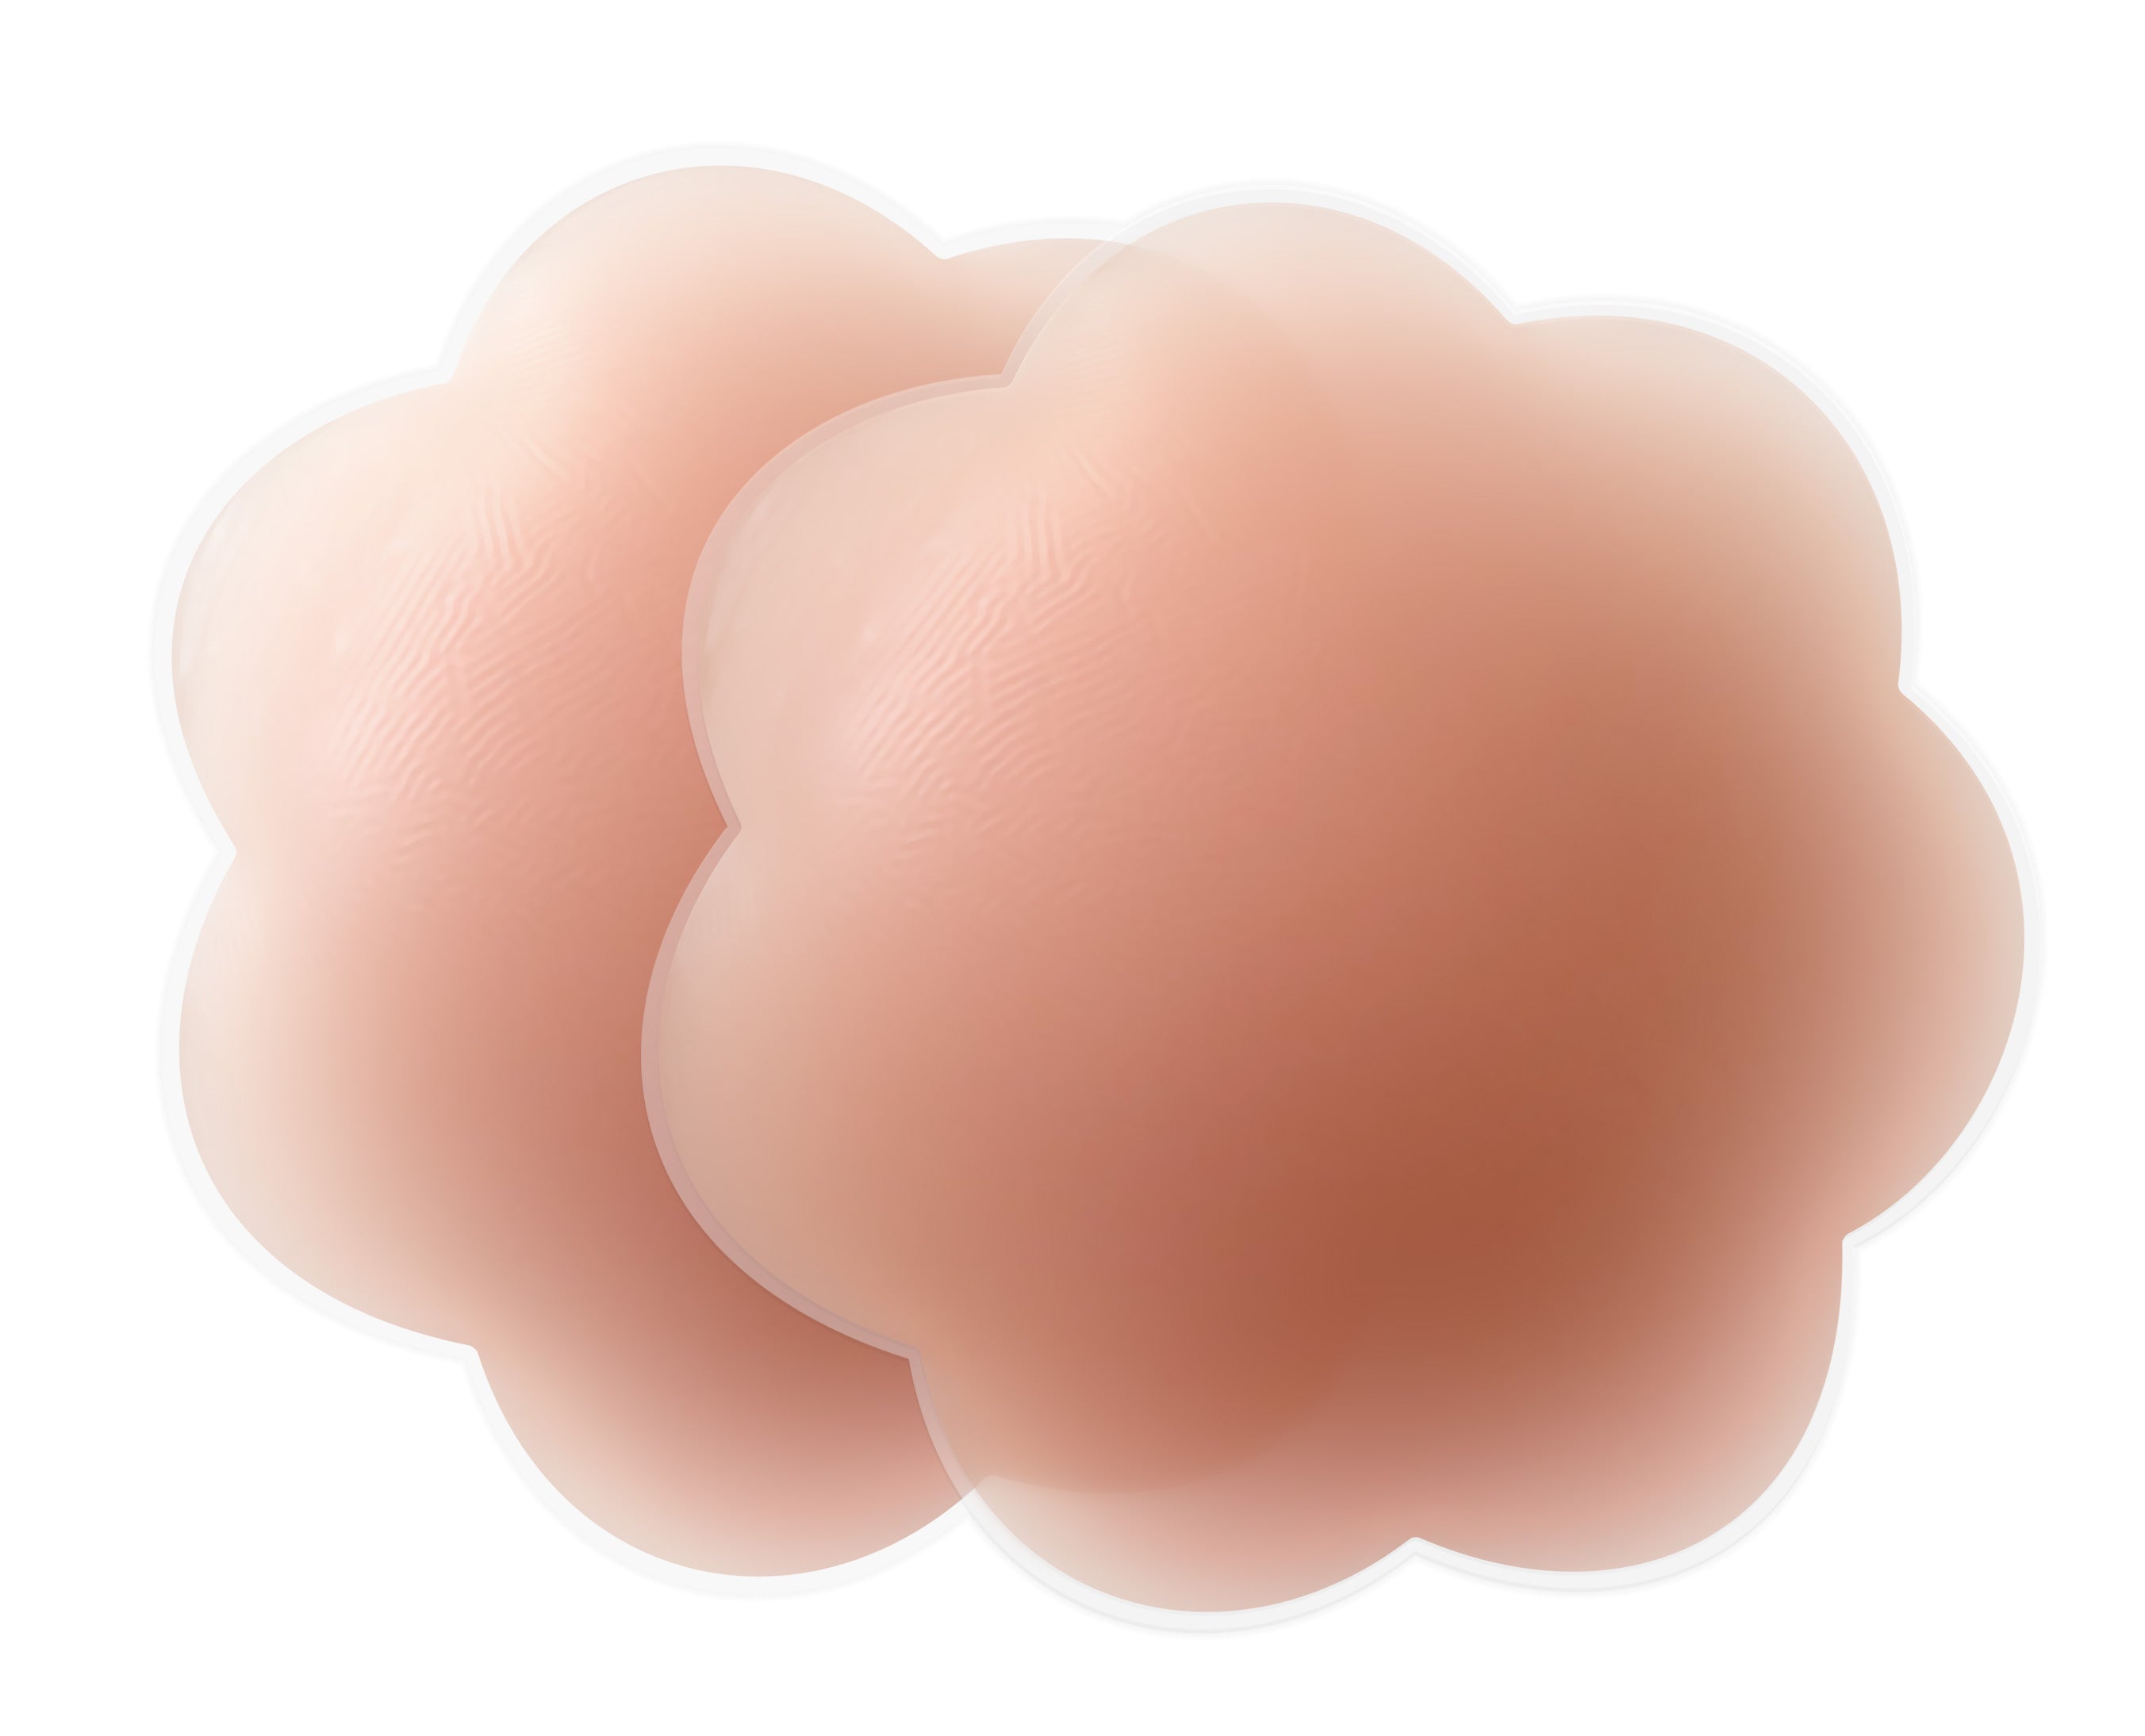 Silicon Boob Tape Nipple Covers - Reusable, Petal Shaped - 2 Pairs, Shop  Today. Get it Tomorrow!